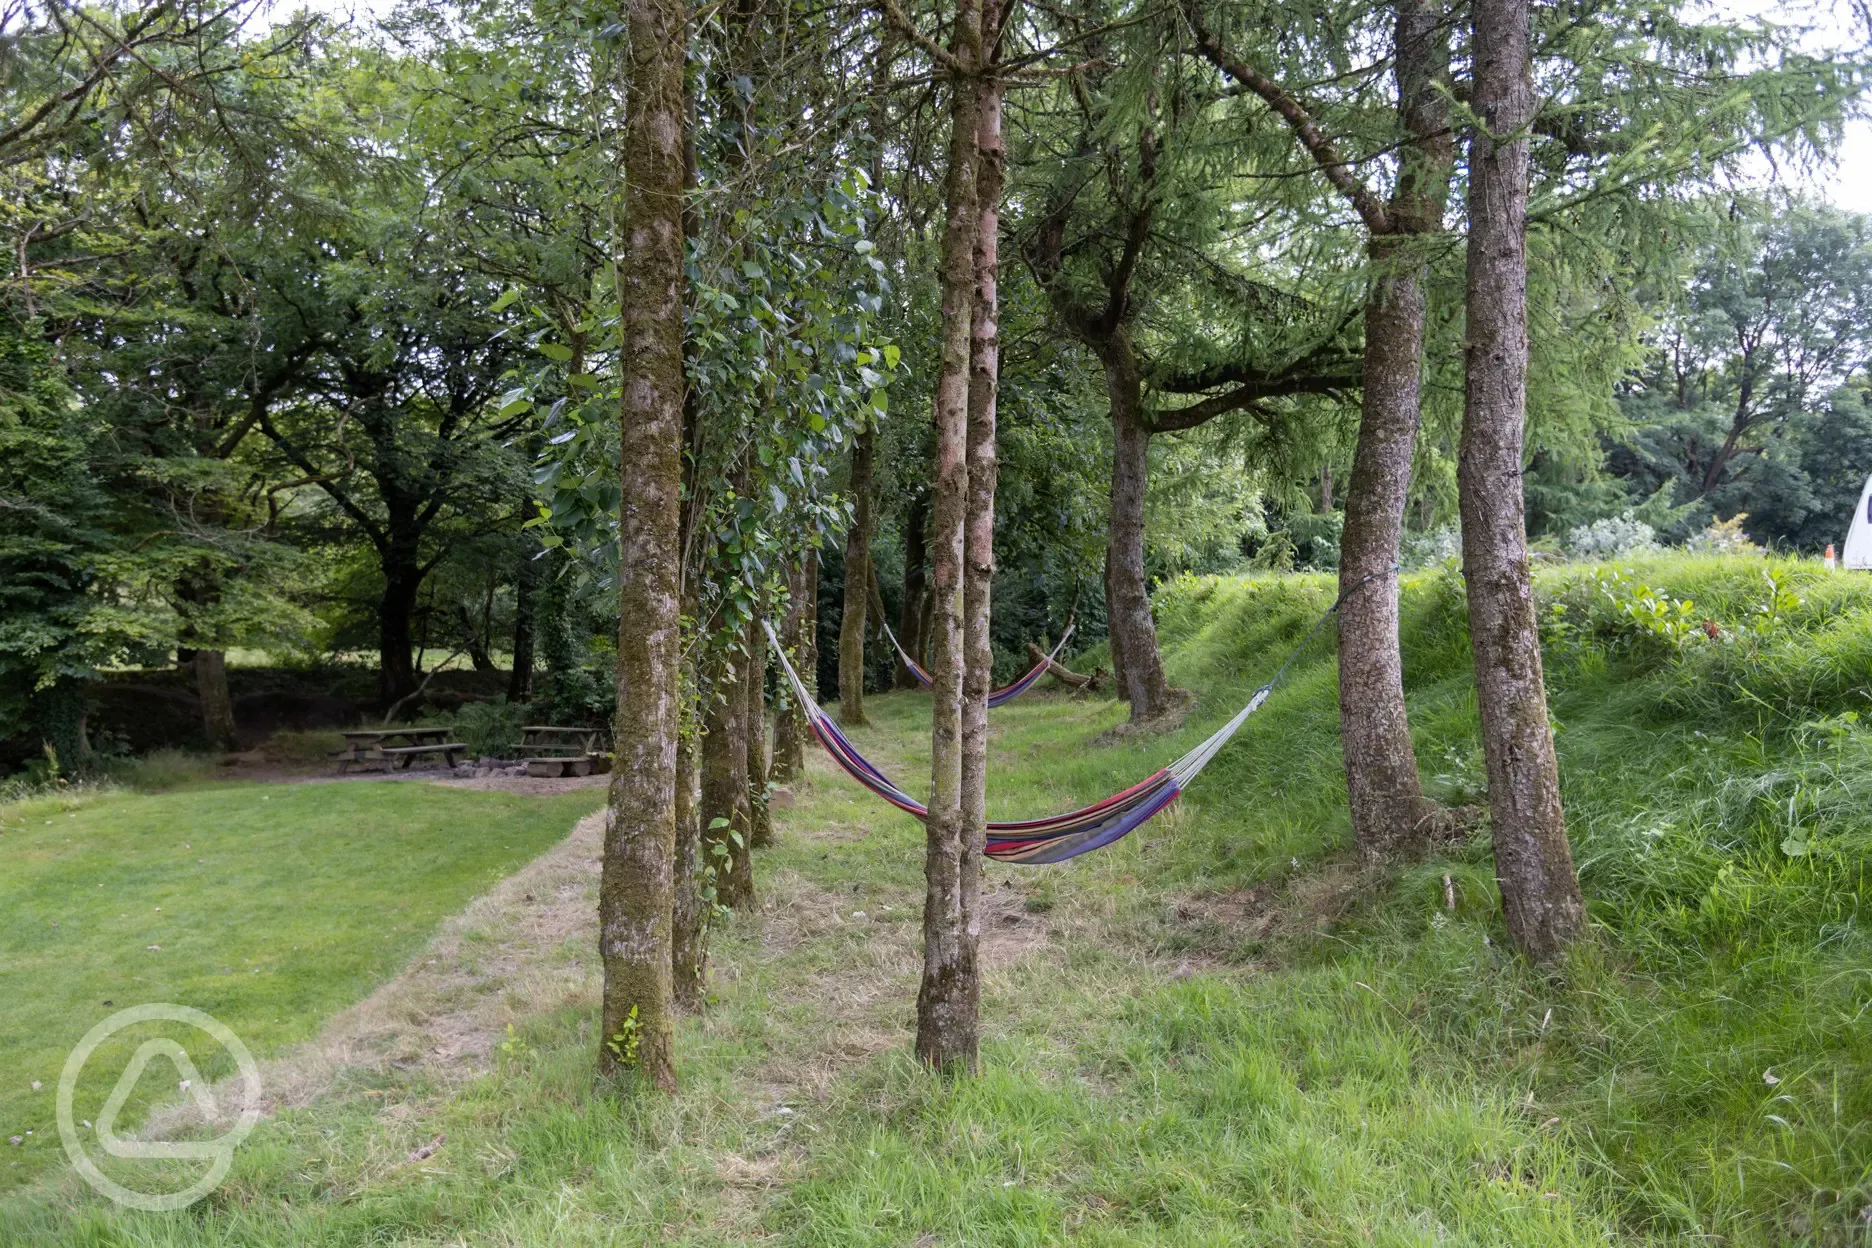 Hammock by the river